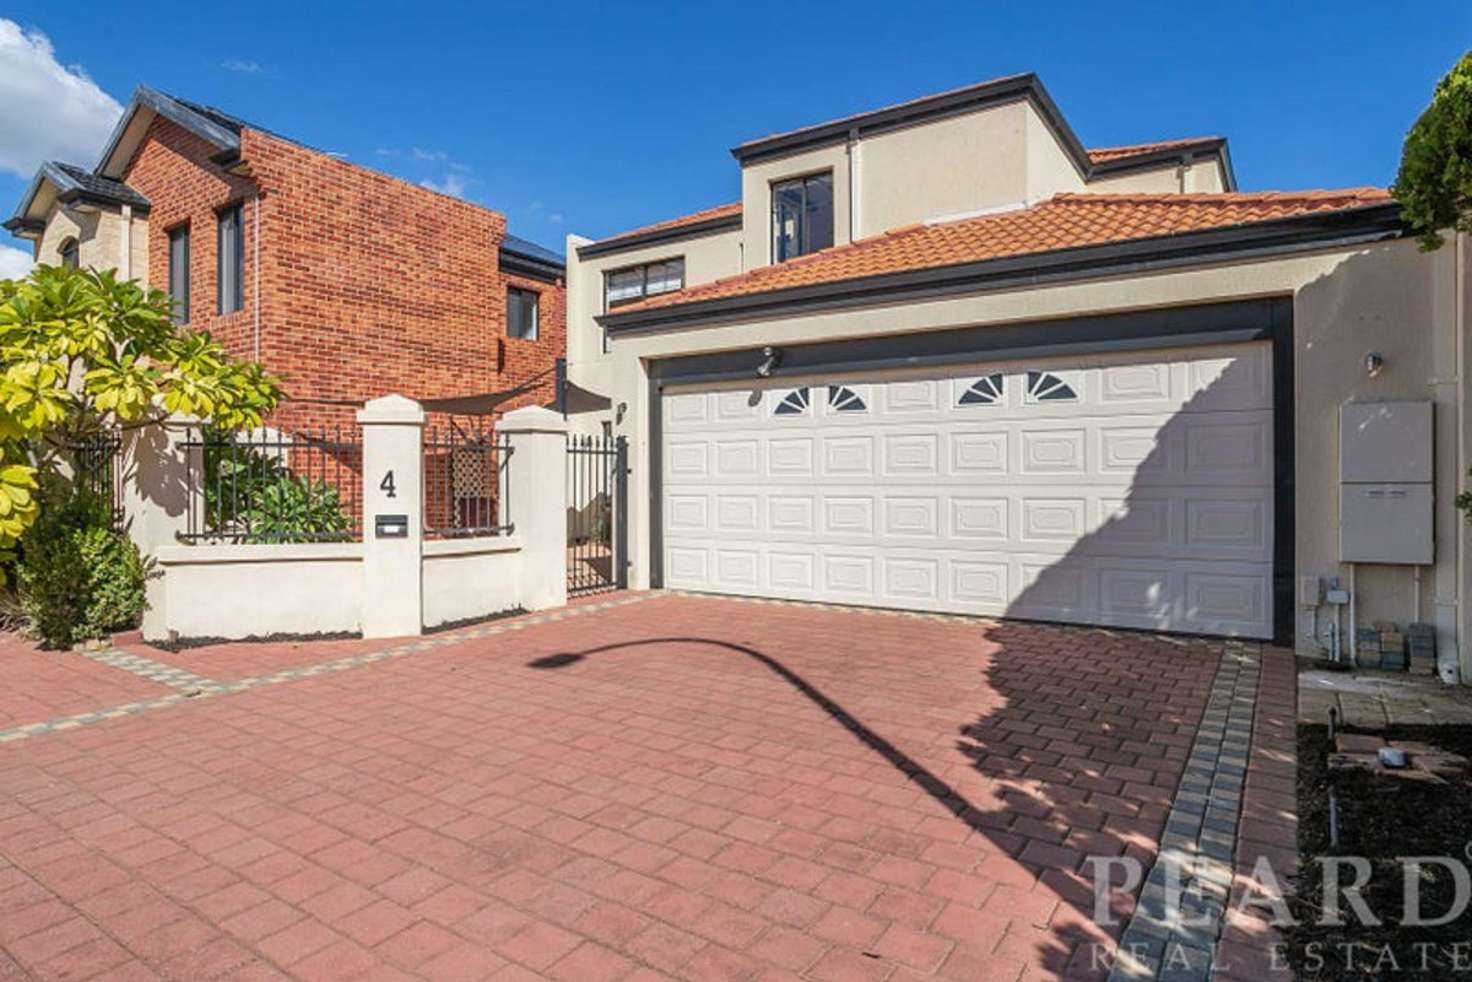 Main view of Homely house listing, 4 Blueboy Rise, Joondalup WA 6027